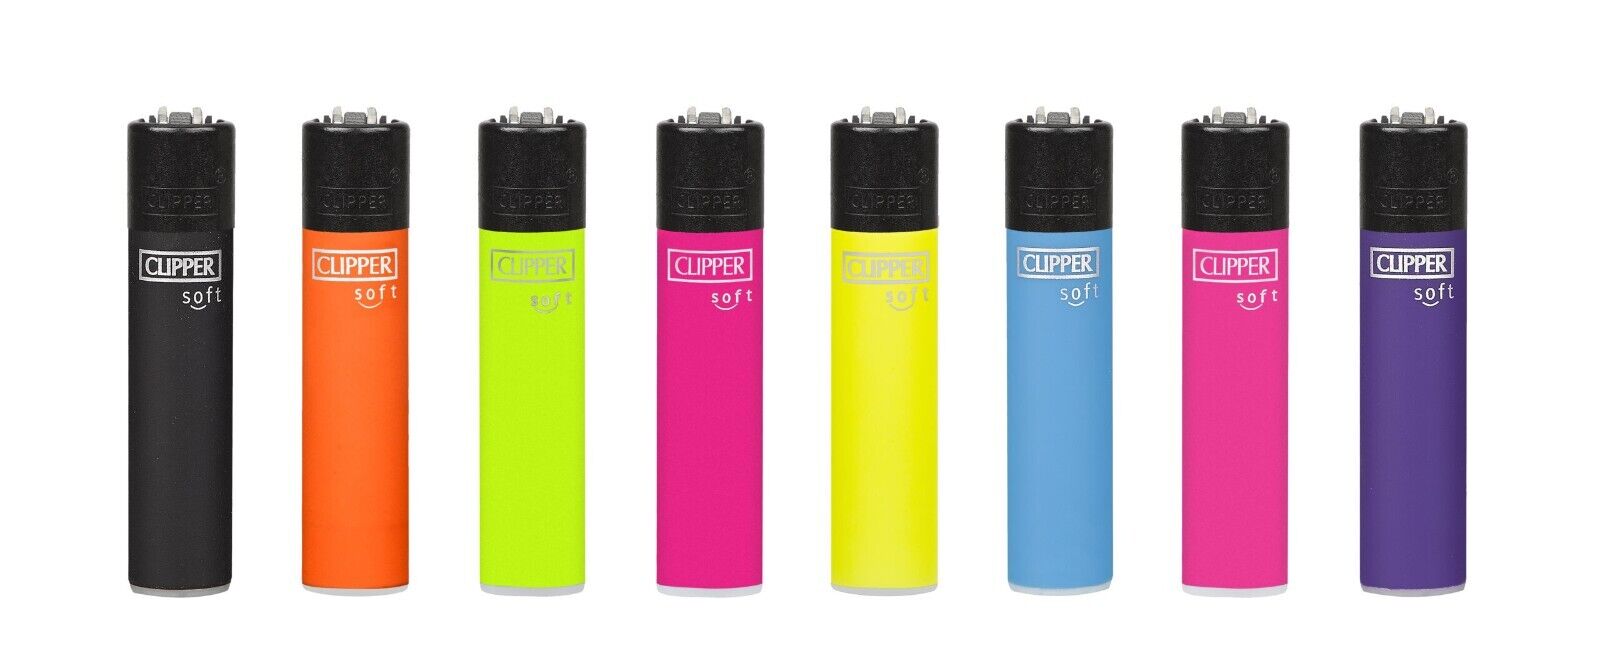 4 X CLIPPER (Full Size Fluorescent - Soft Touch) LIGHTERS Refillable - Mix Color